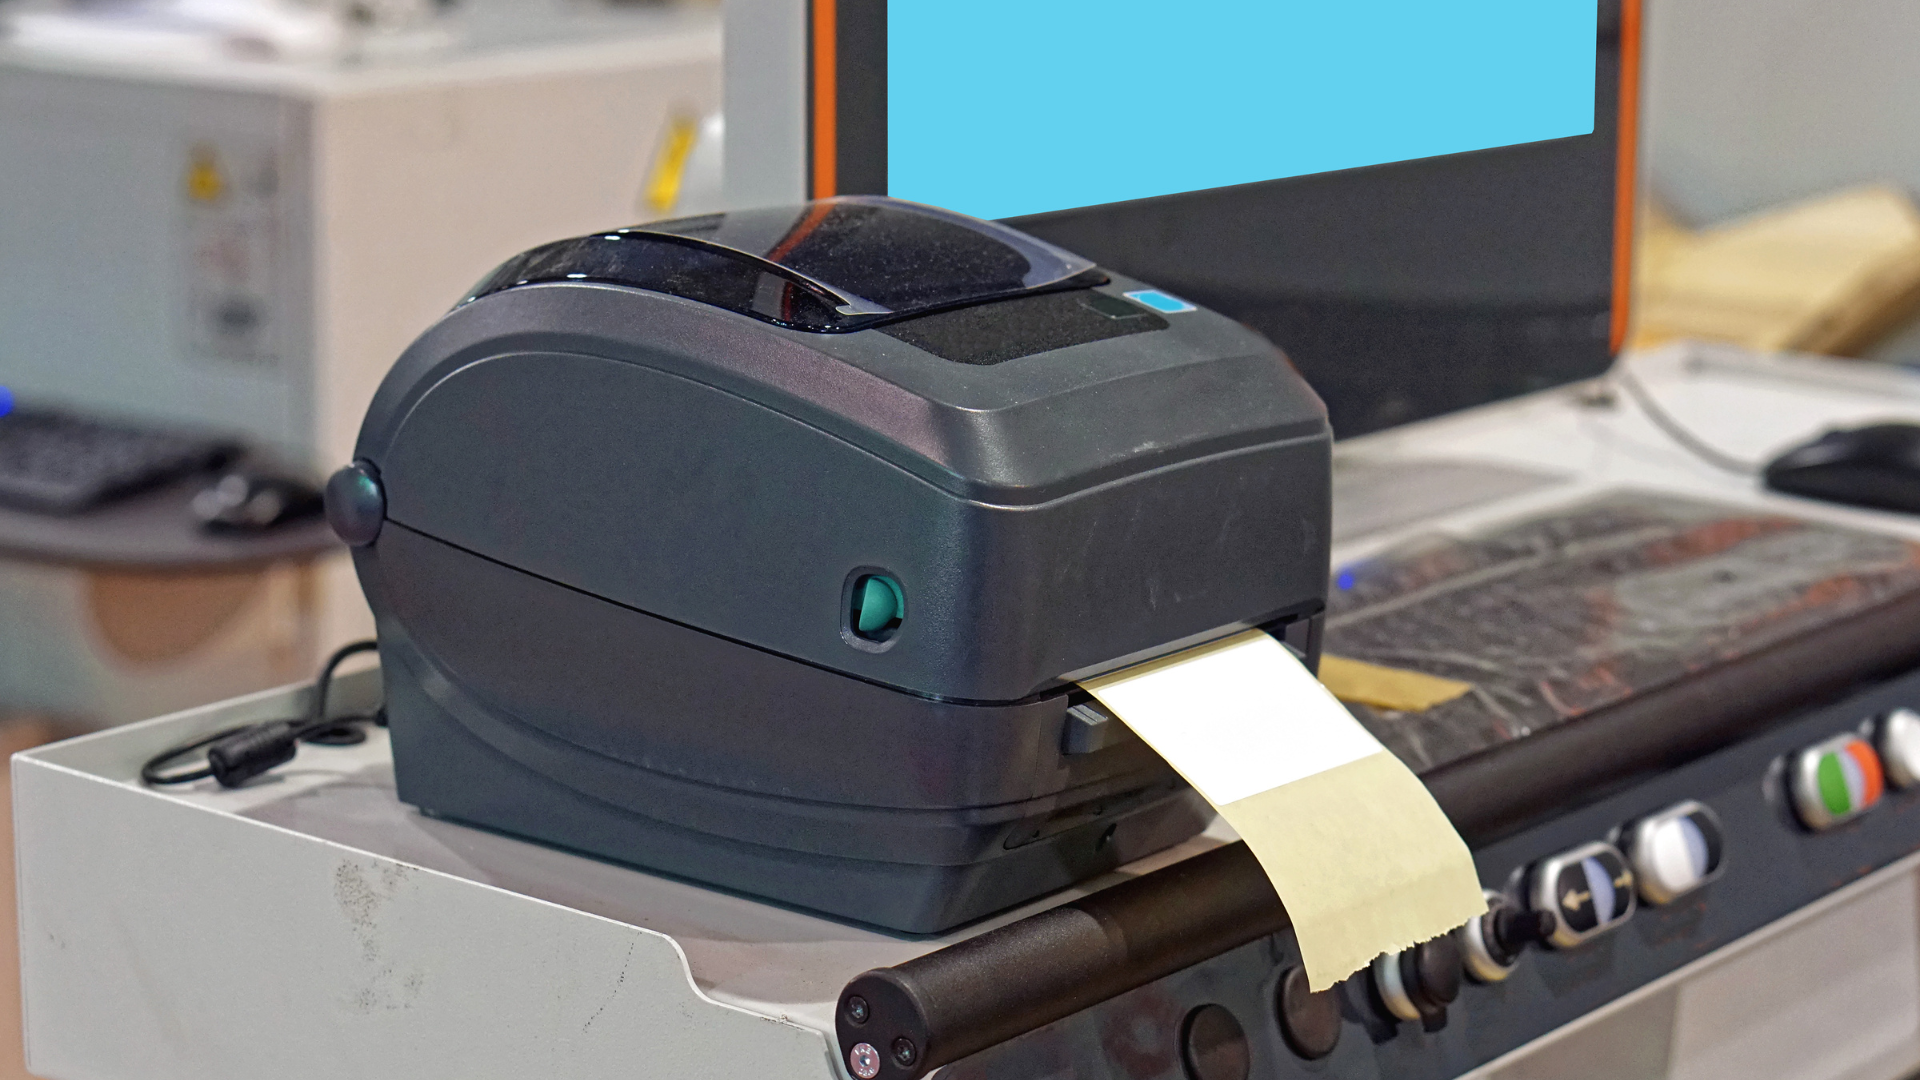 Why Might Your Organisation Need to Use Mobile Printers?